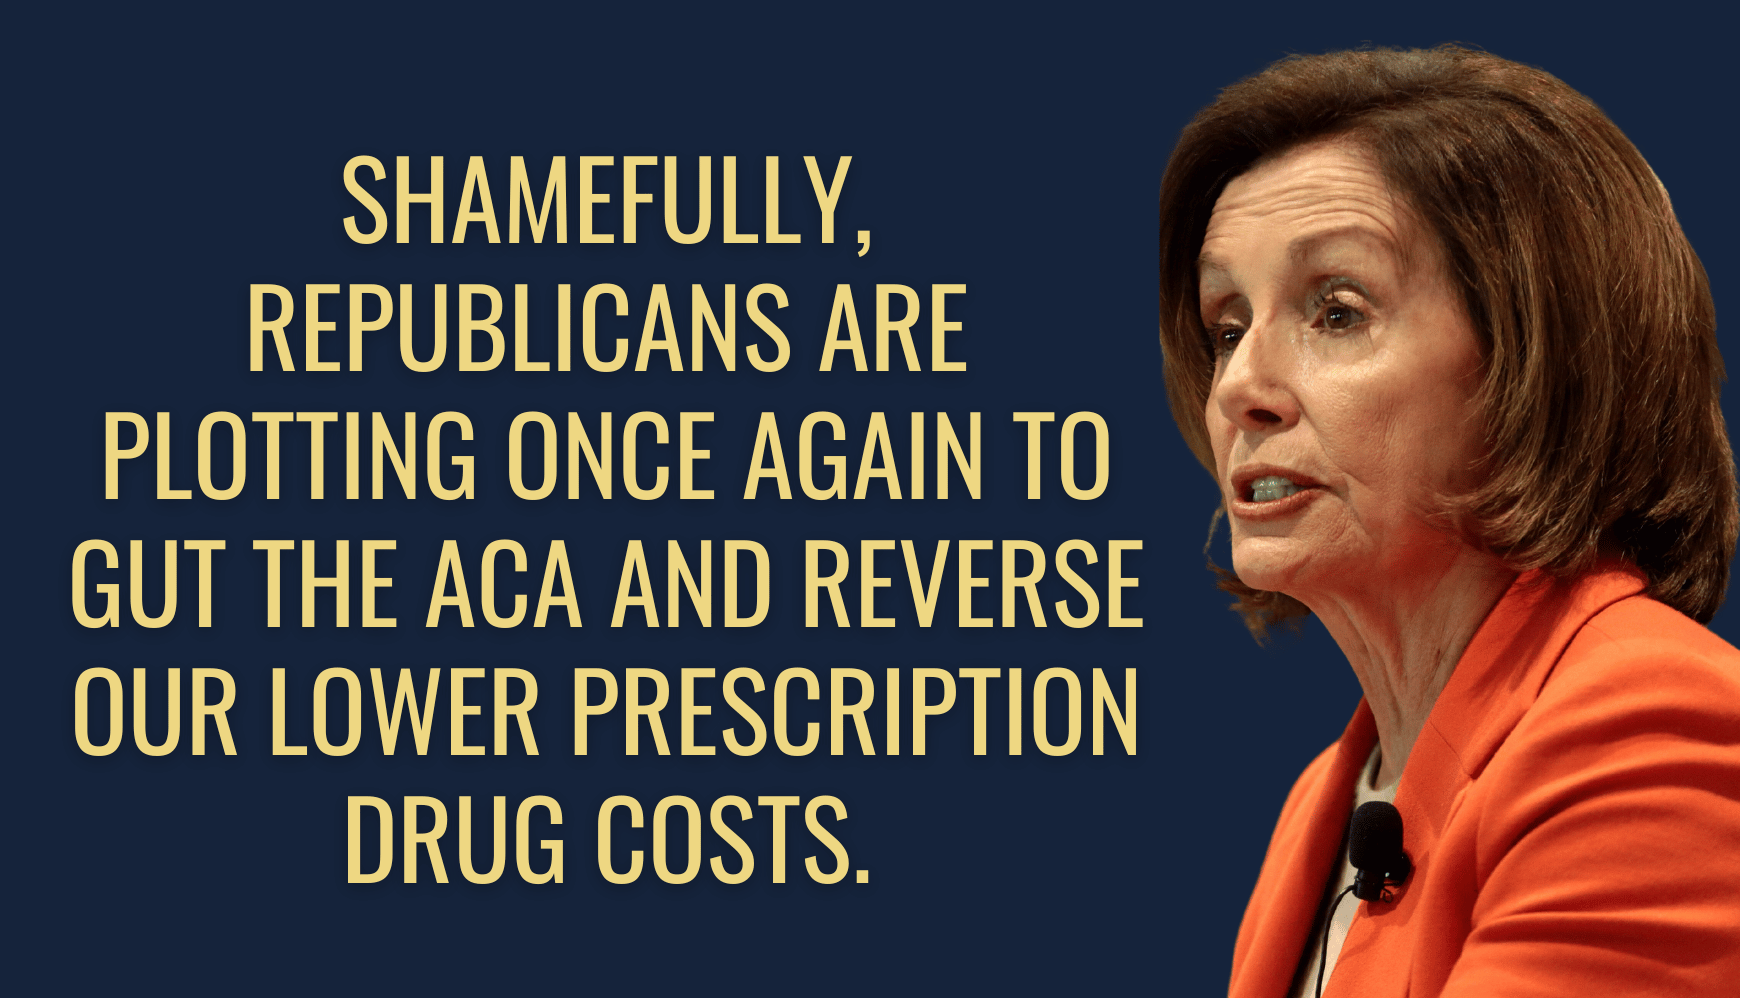 Nancy Pelosi: Shamefully, Republicans are plotting once again to gut the ACA and reverse our lower prescription drug costs.